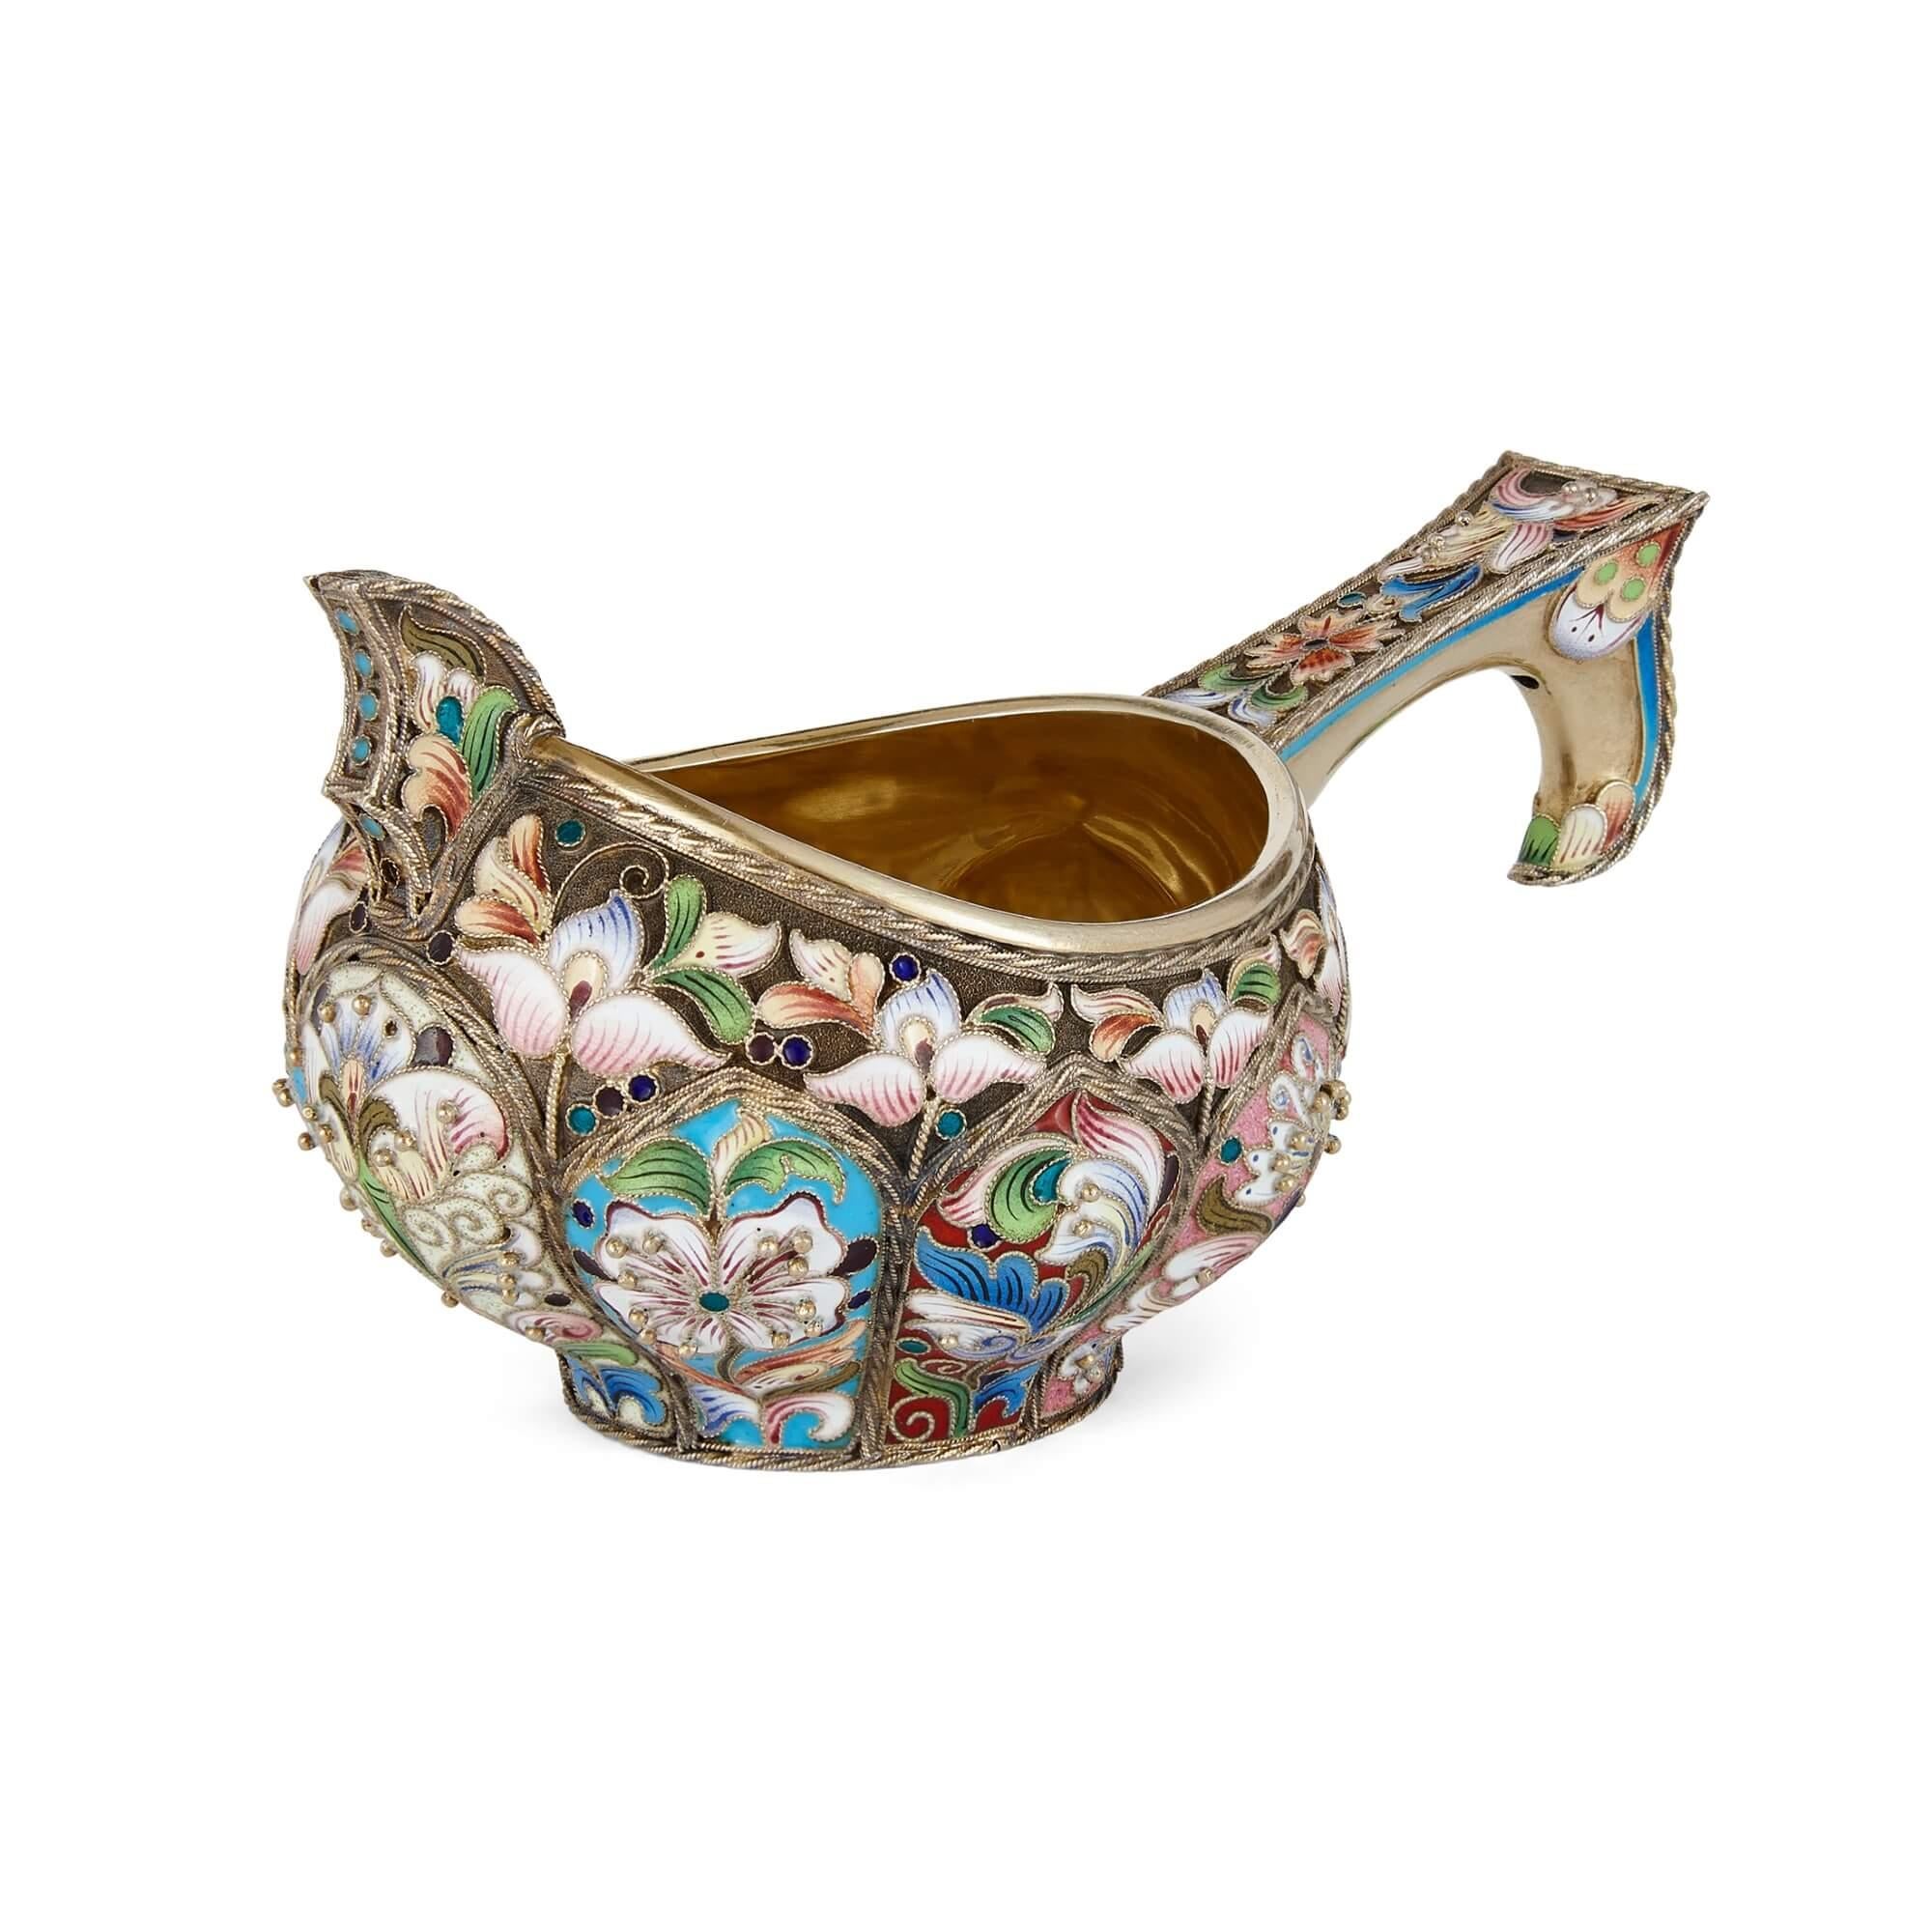 Russian kovsch in silver gilt, cloisonne enamel and silver pearl
Russian, 20th Century
Height 7cm, width 12cm, depth 7cm

This kovsch is a meticulously crafted piece, made by marrying the lustrous appeal of silver gilt, with the vibrancy of